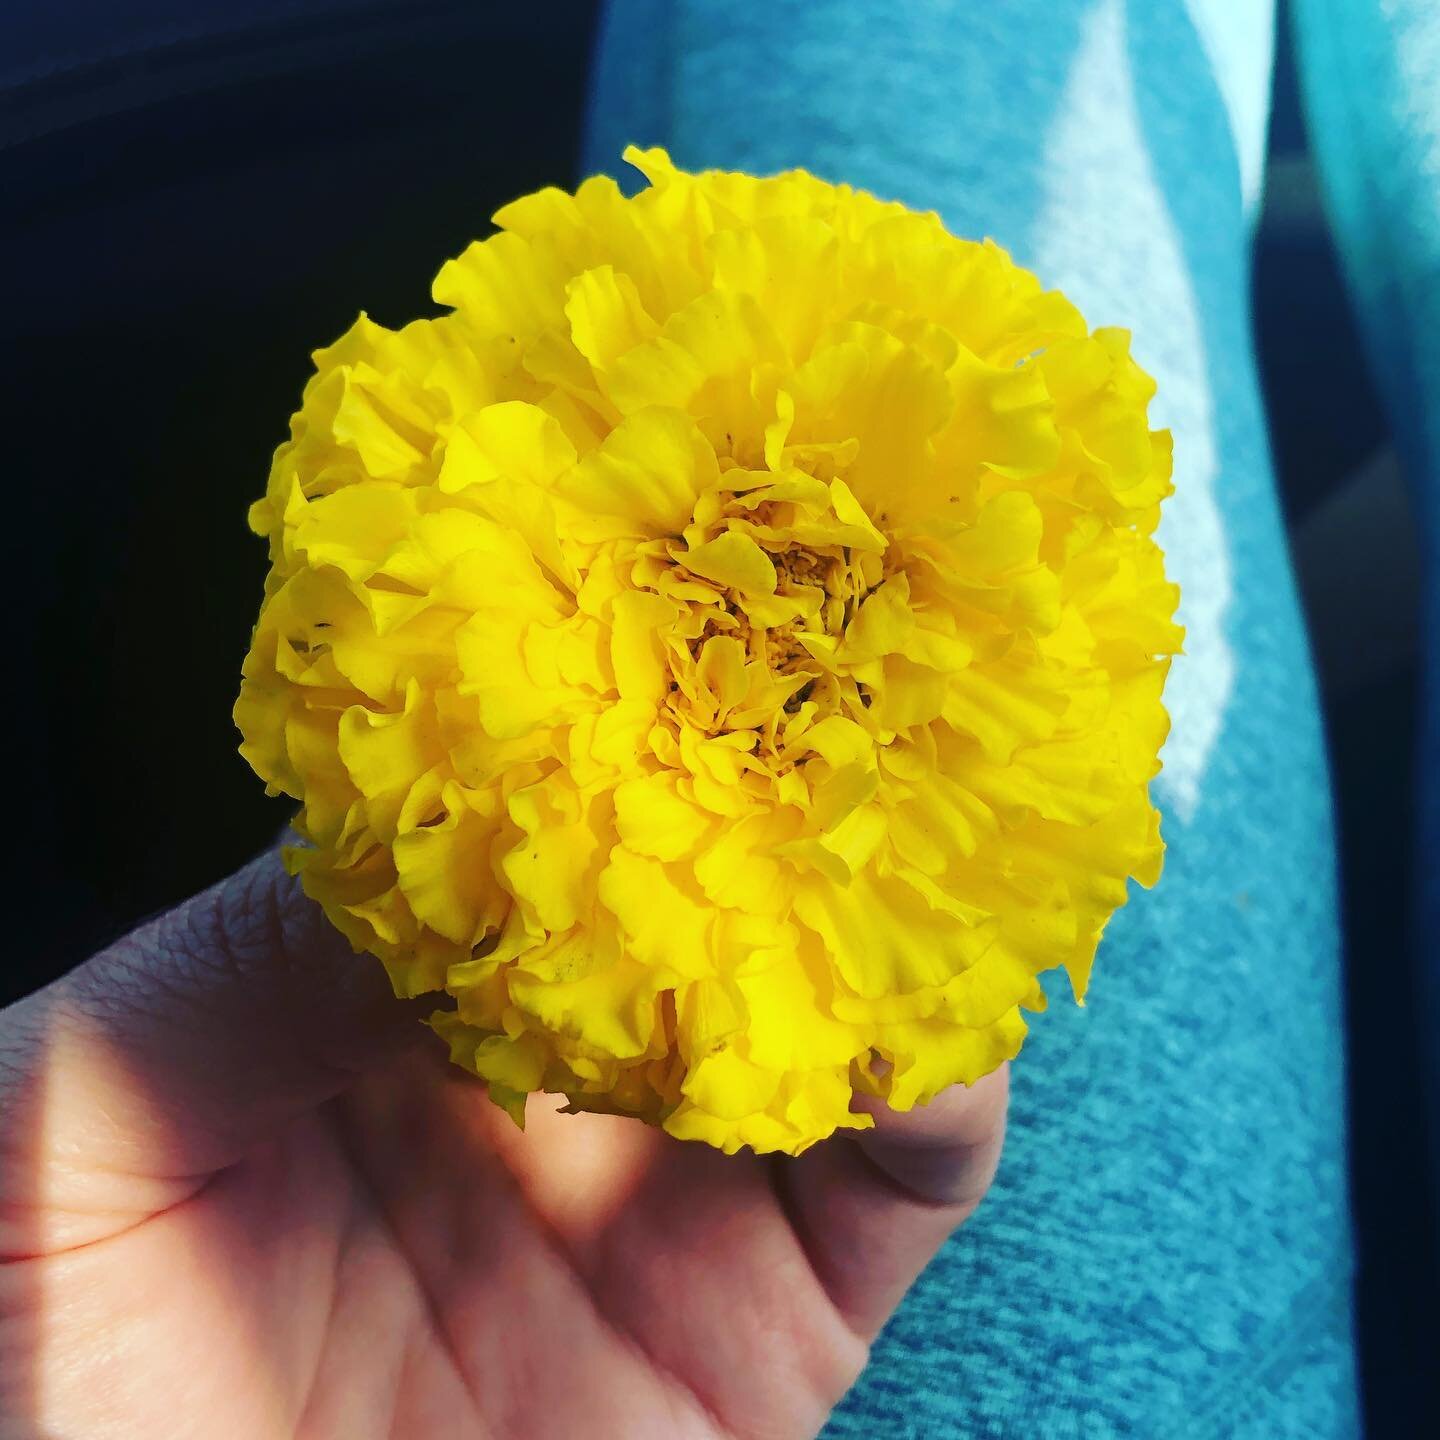 When your 5-year-old picks the sweetest and most beautiful flower for you. 🌸 Mommas - never forget how much you are loved. #cherishedmoments #youareenough  #momlife #youareloved #thelittlemoments #glazeandgrit #glazeandgritpodcast